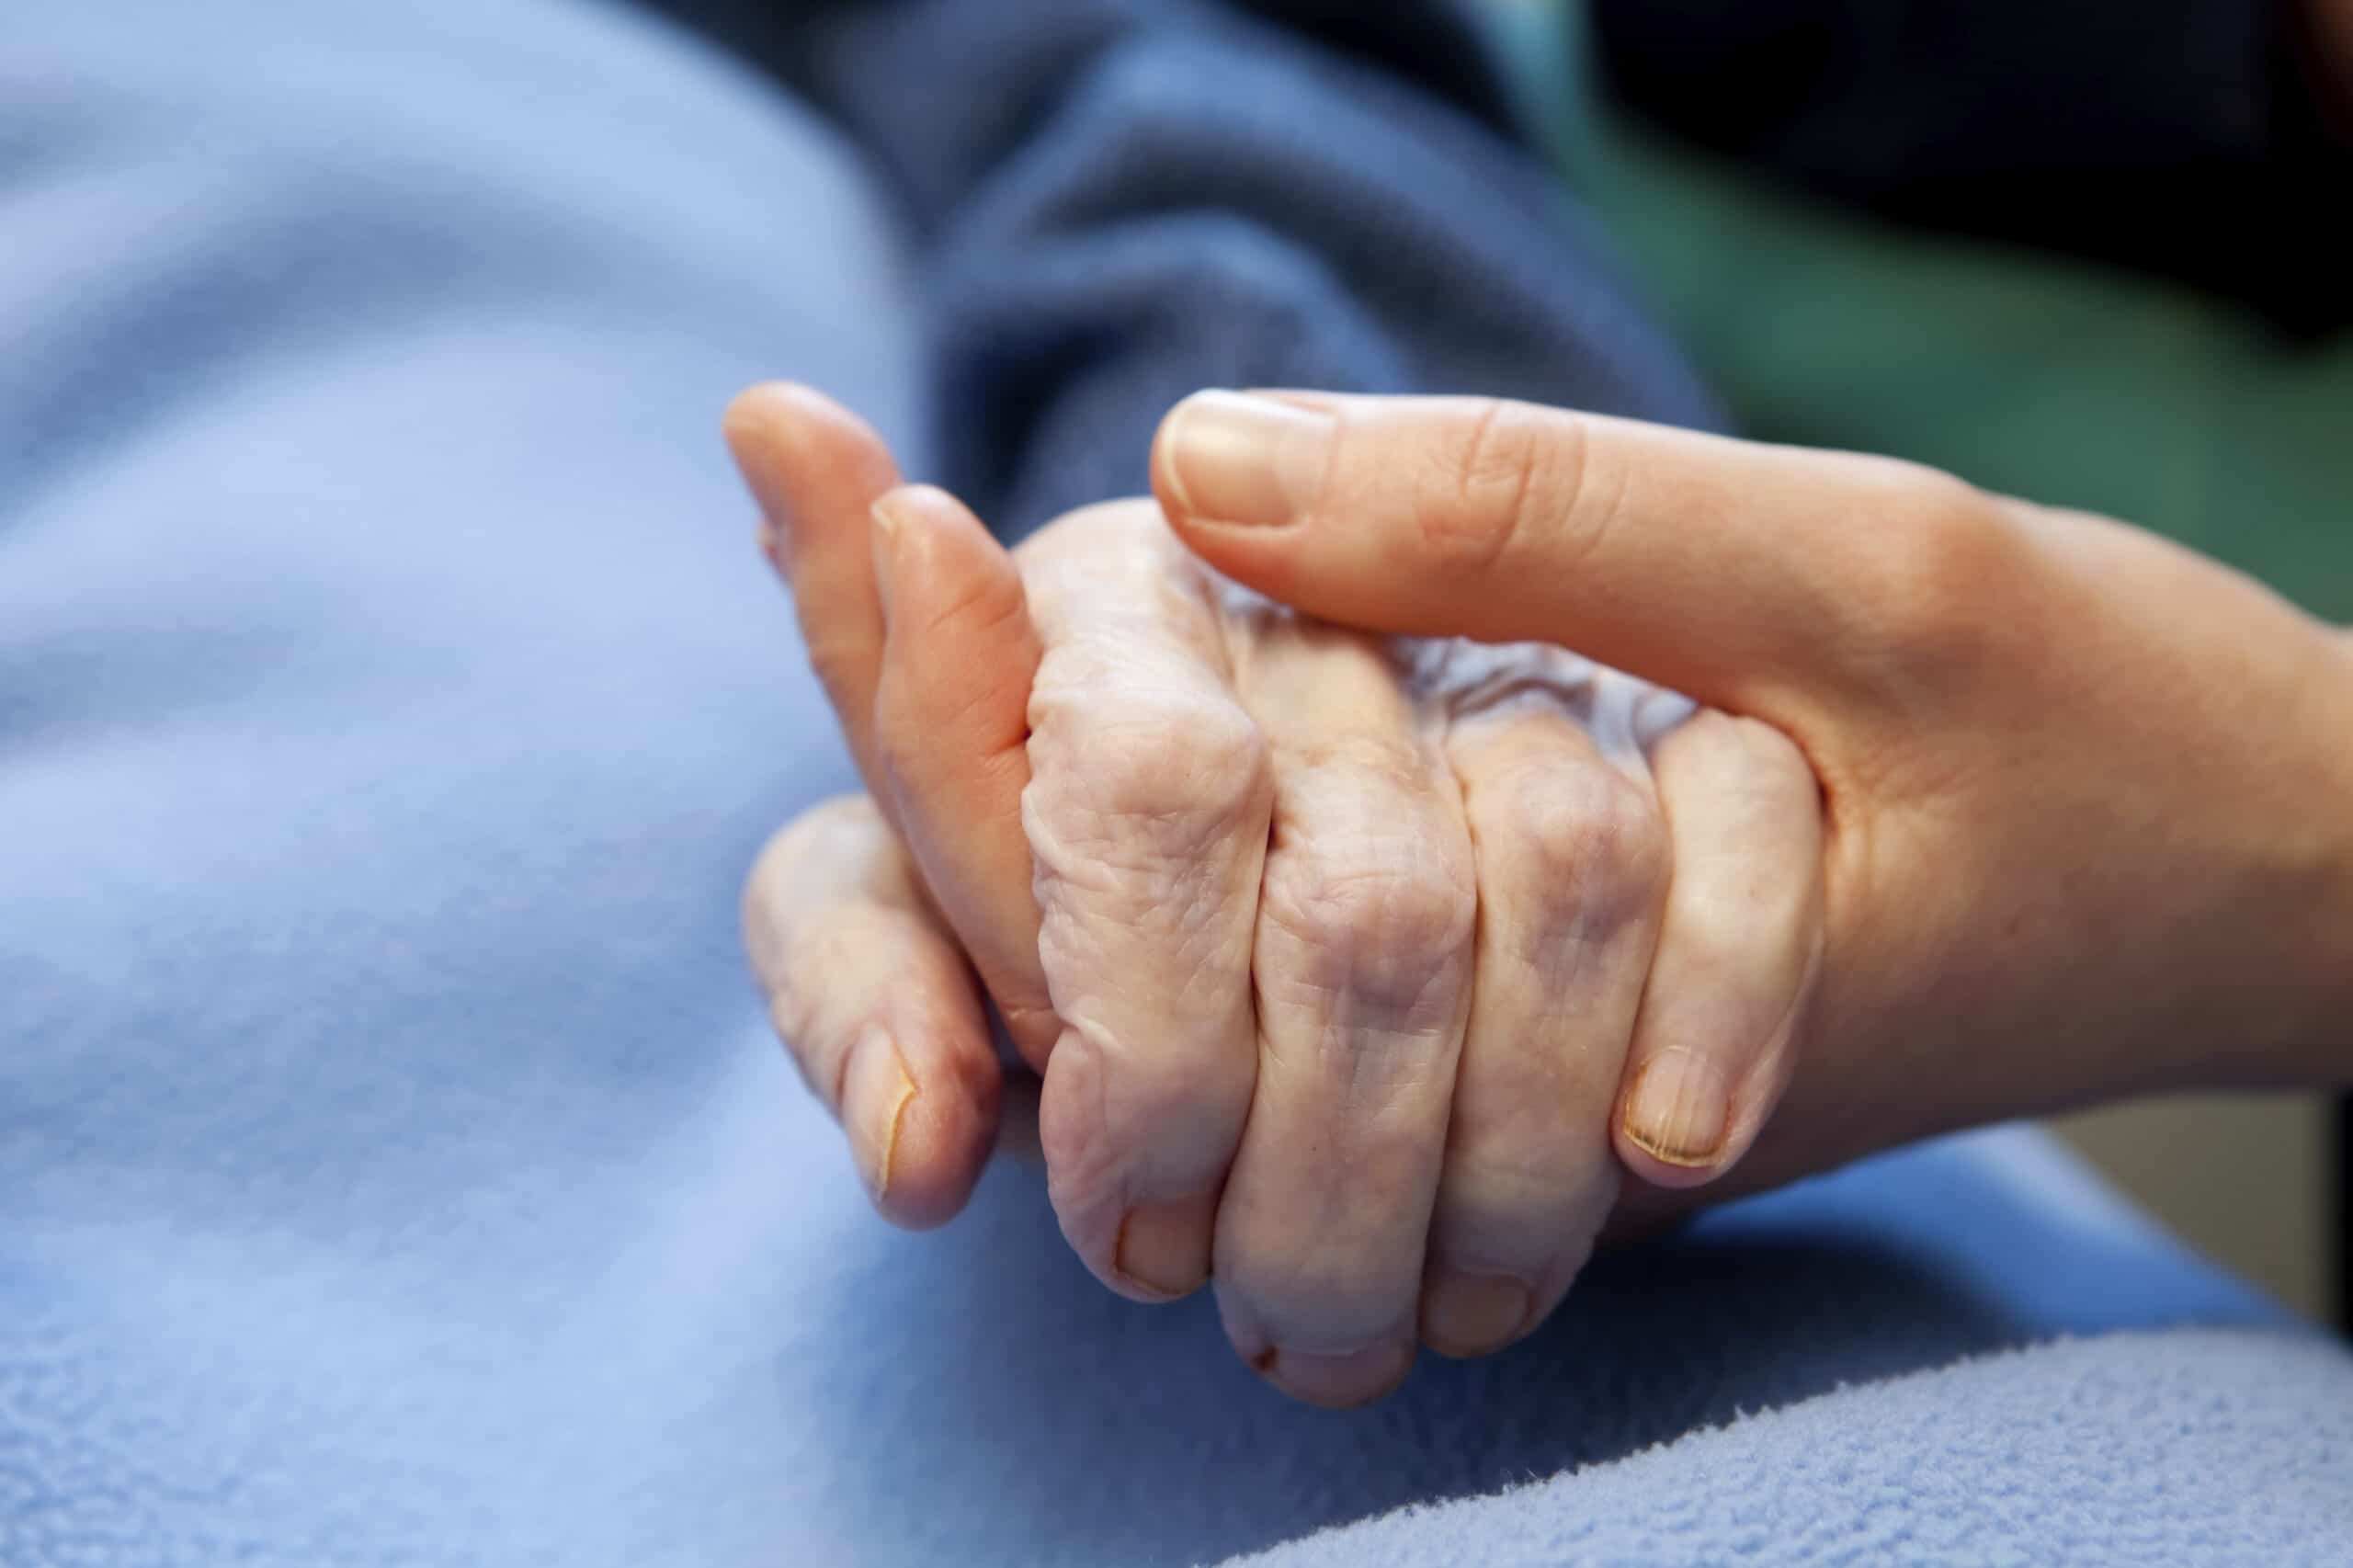 A caregiver holding a patient's hand during end of life care